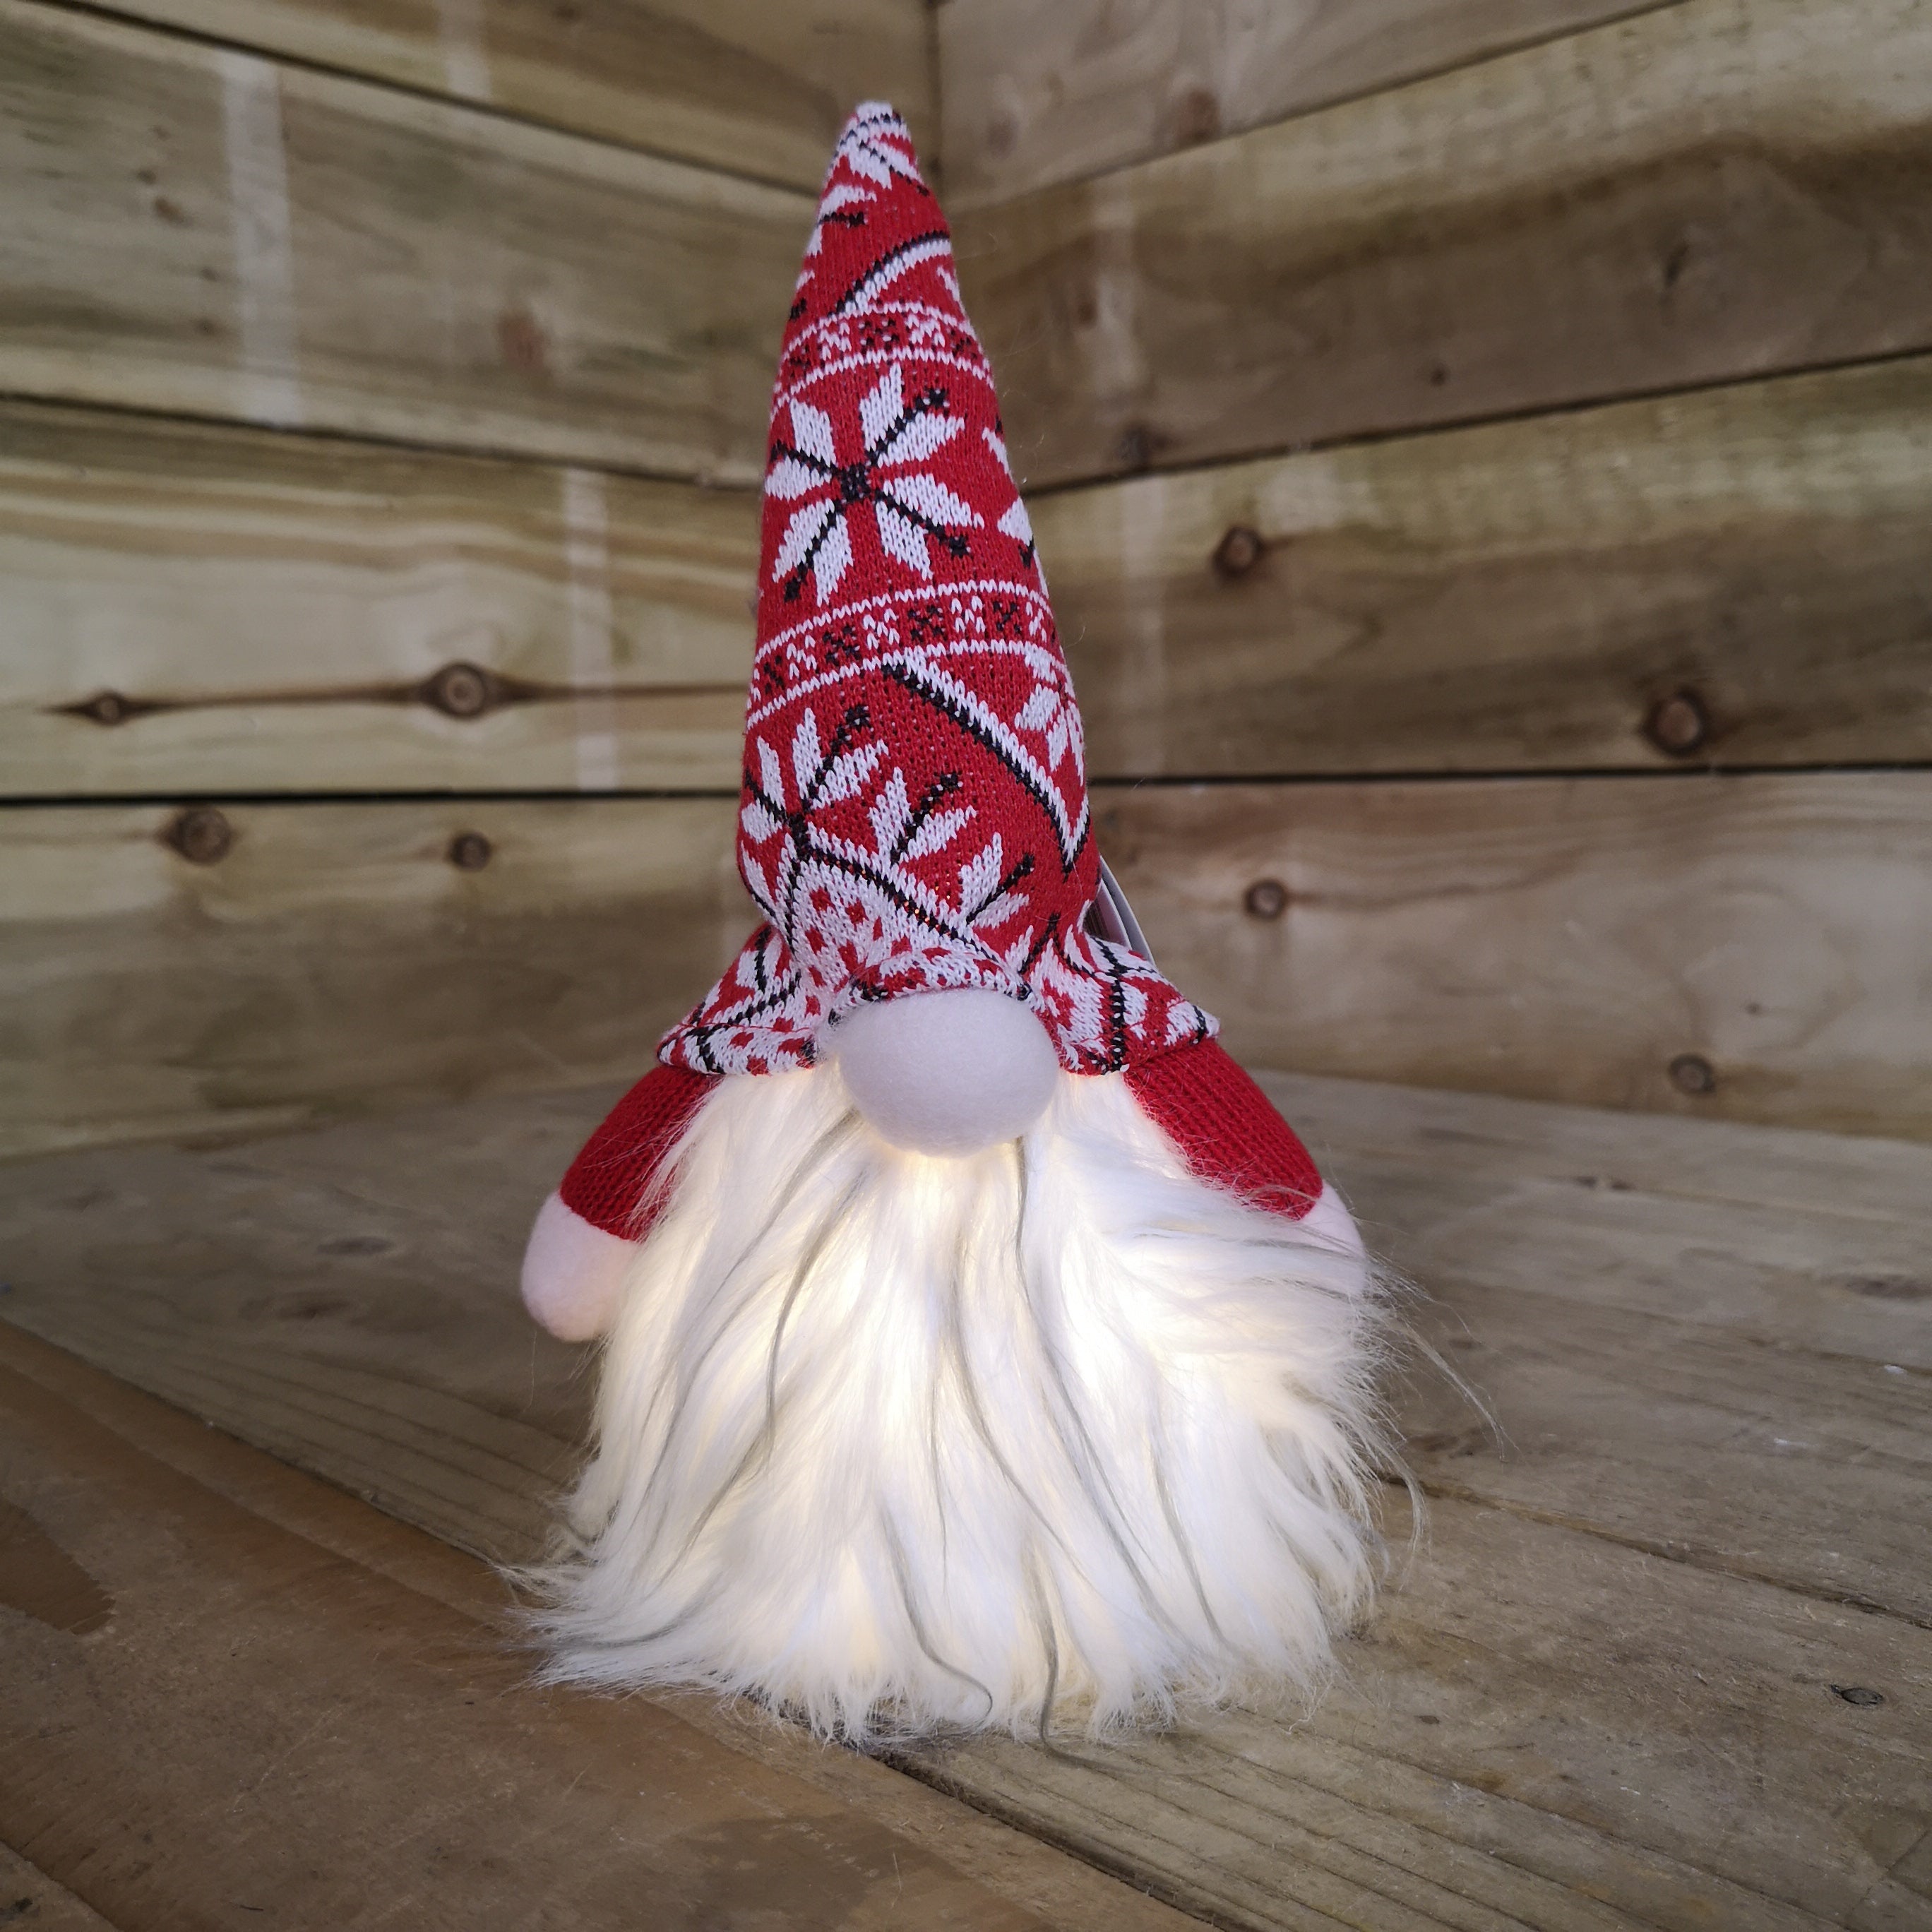 27cm Tall Christmas Light Up Gnome Gonk Nordic Decoration Red Patterned Hat Sitting